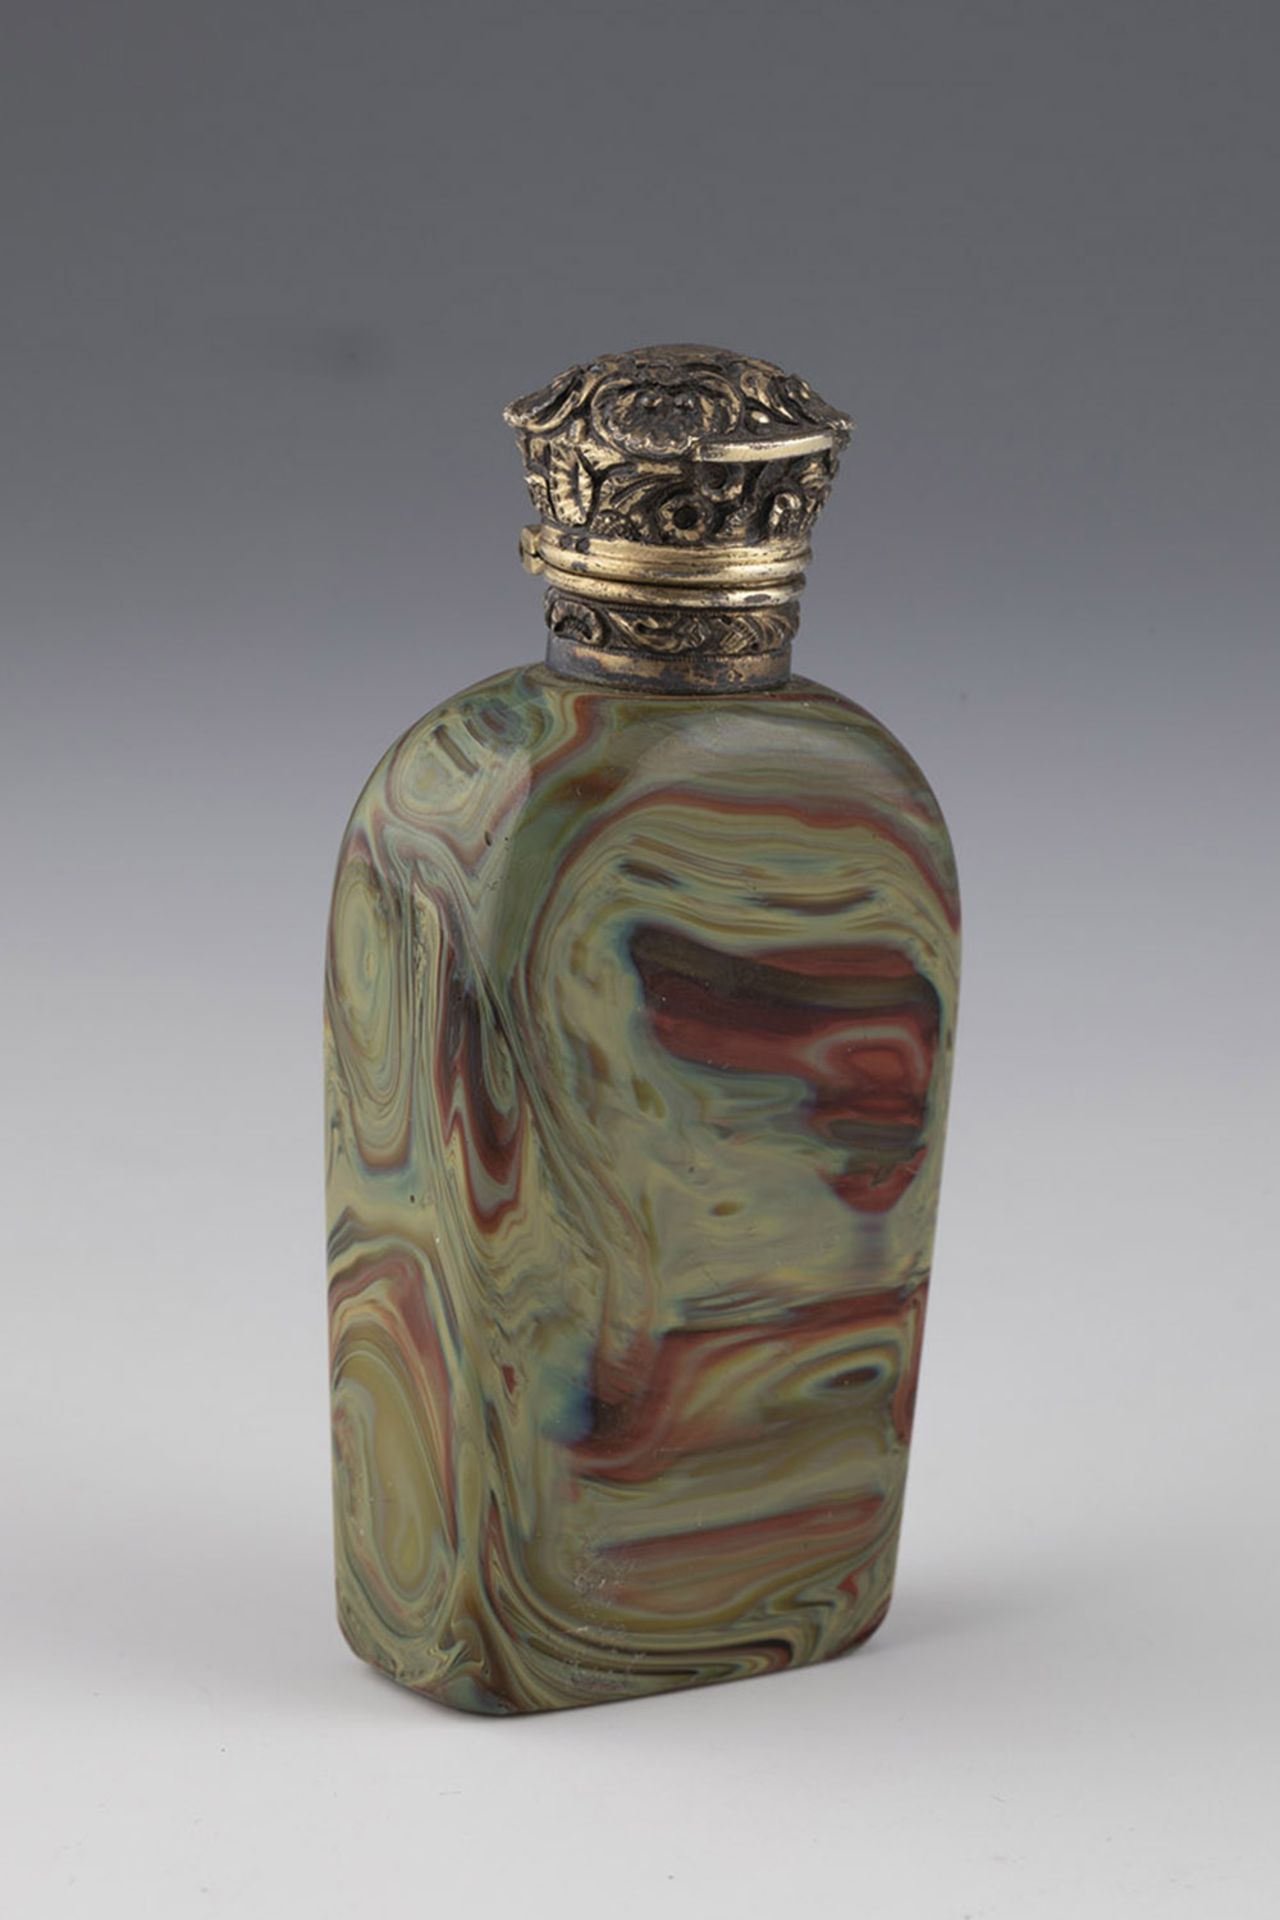 Perfume bottle Bohemia, ca. 1850 Lithyaline glass with metal mount and glass stopper. Green and